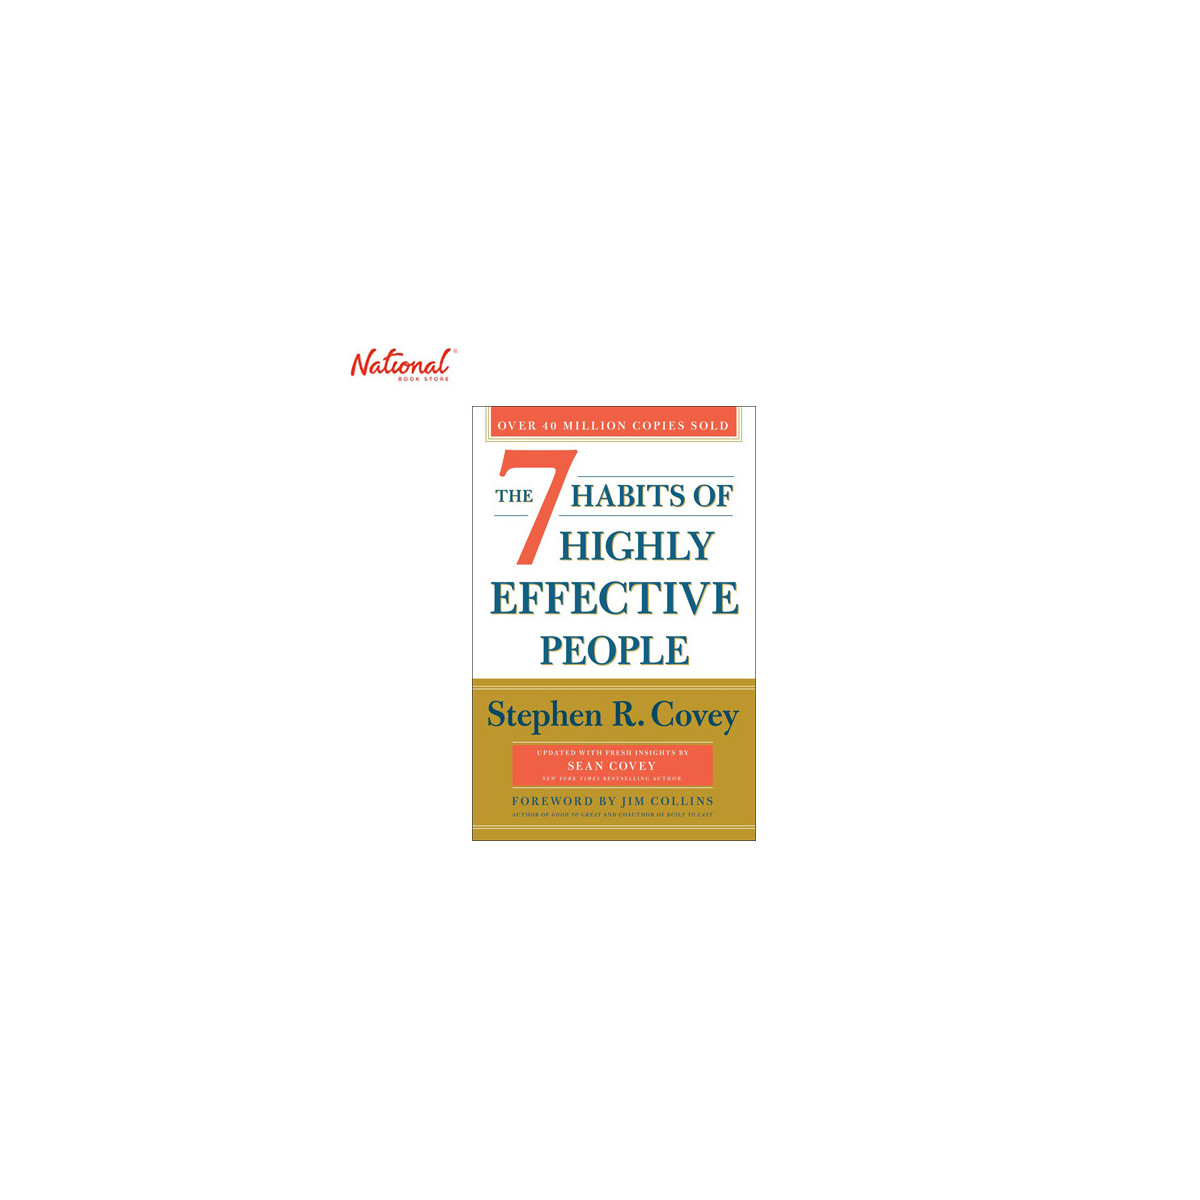 The 7 Habits of Highly Effective People Trade Paperback by Stephen R. Covey